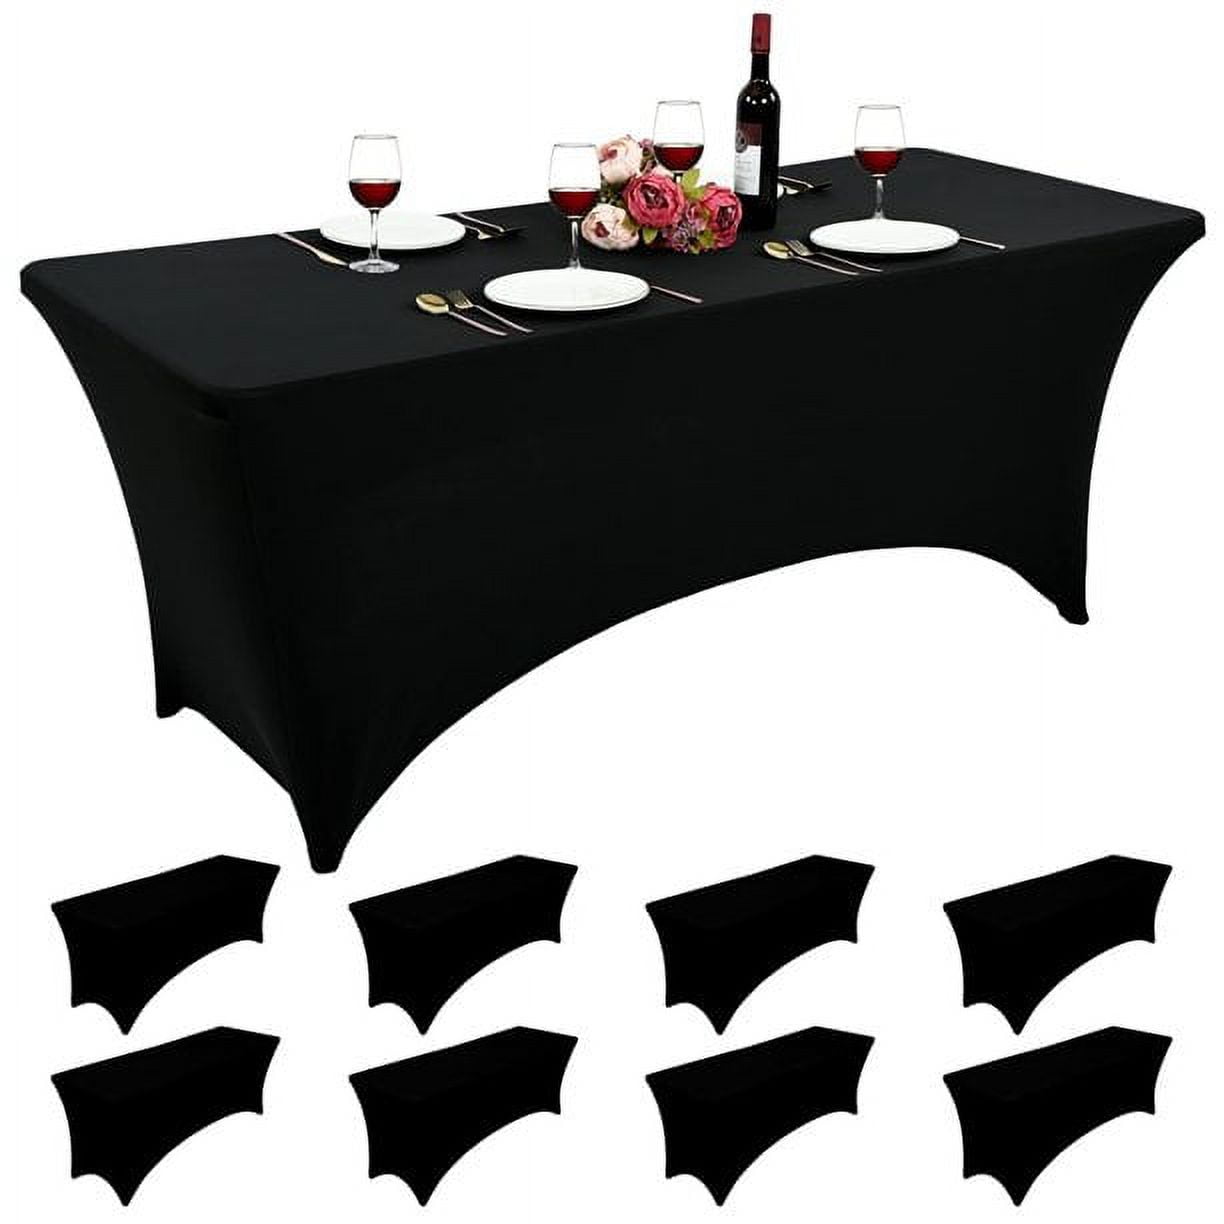 Utopia Kitchen Spandex Tablecloth 1 Pack [6FT, Black] Tight, Fitted,  Washable and Wrinkle Resistant Stretch Rectangular Patio Table Cover for  Event